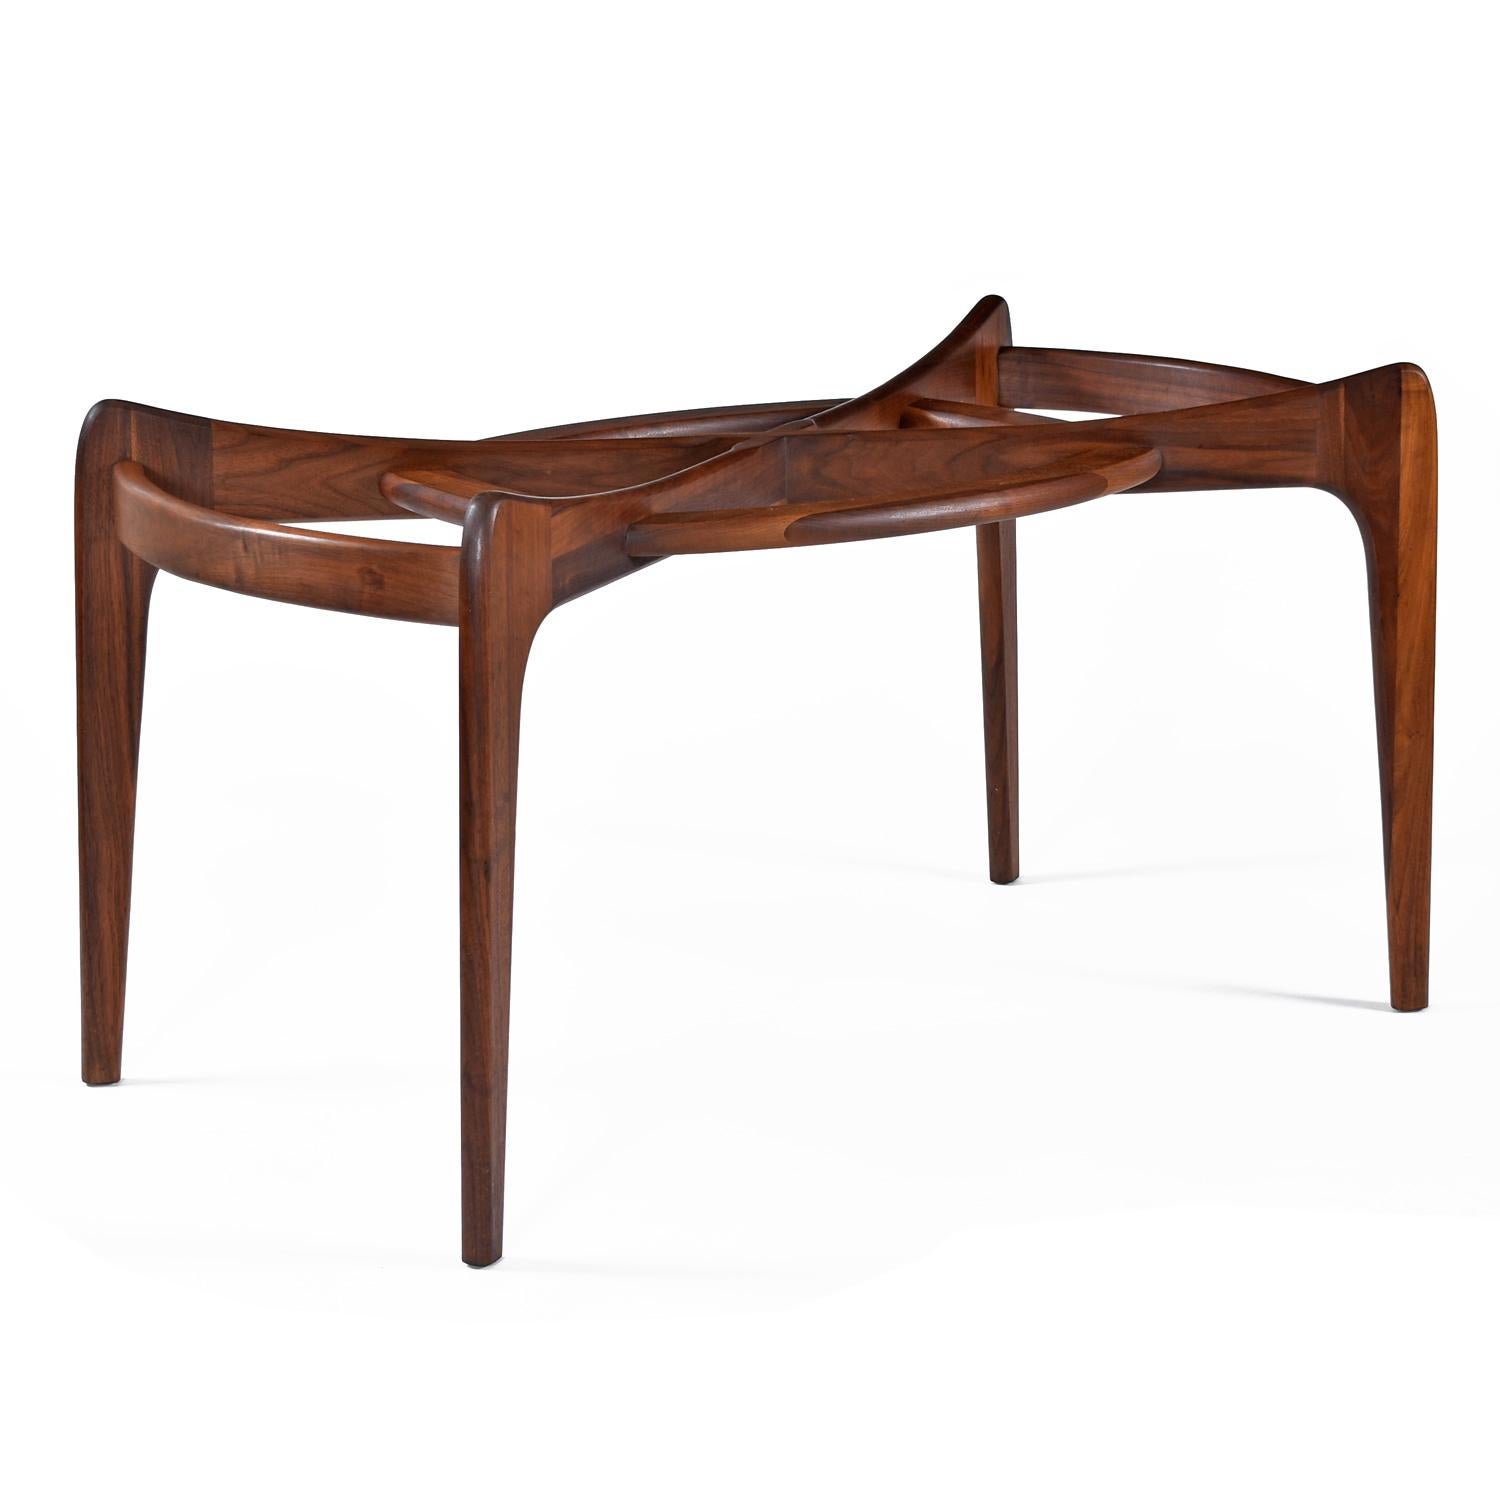 American Original Adrian Pearsall 2179-T Walnut Compass Dining Table